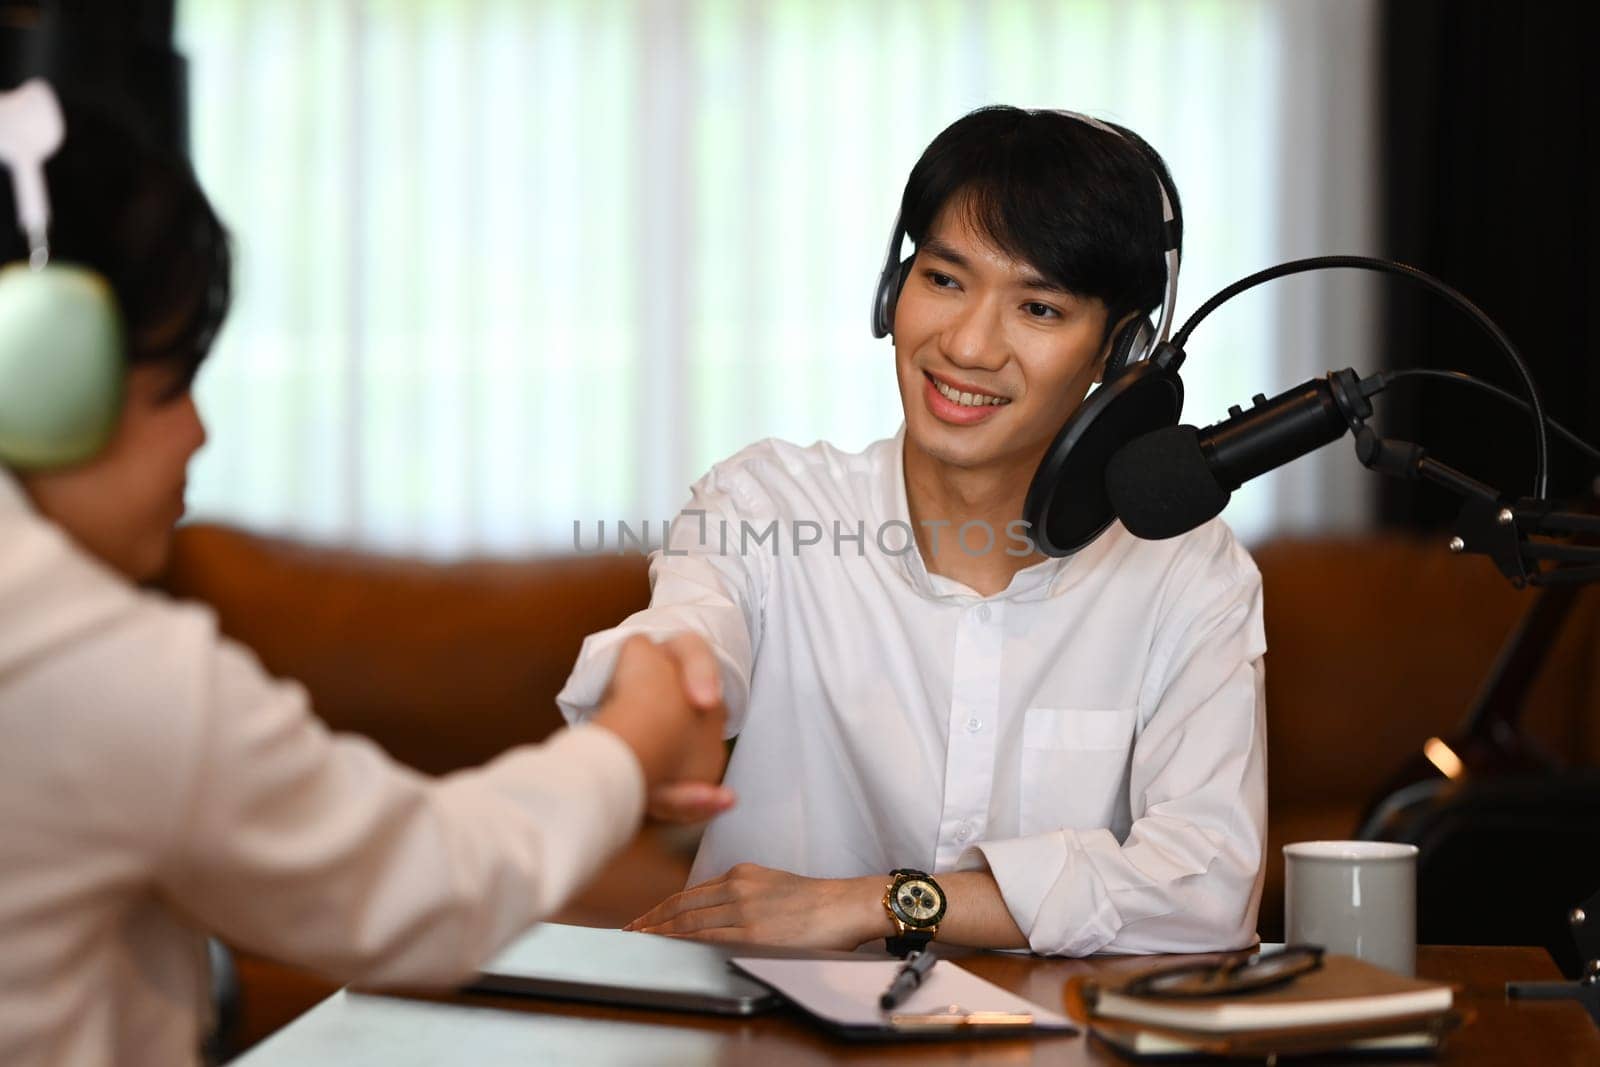 Smiling radio host shaking hands with her guest after interviewing. Podcasts and technology concept.